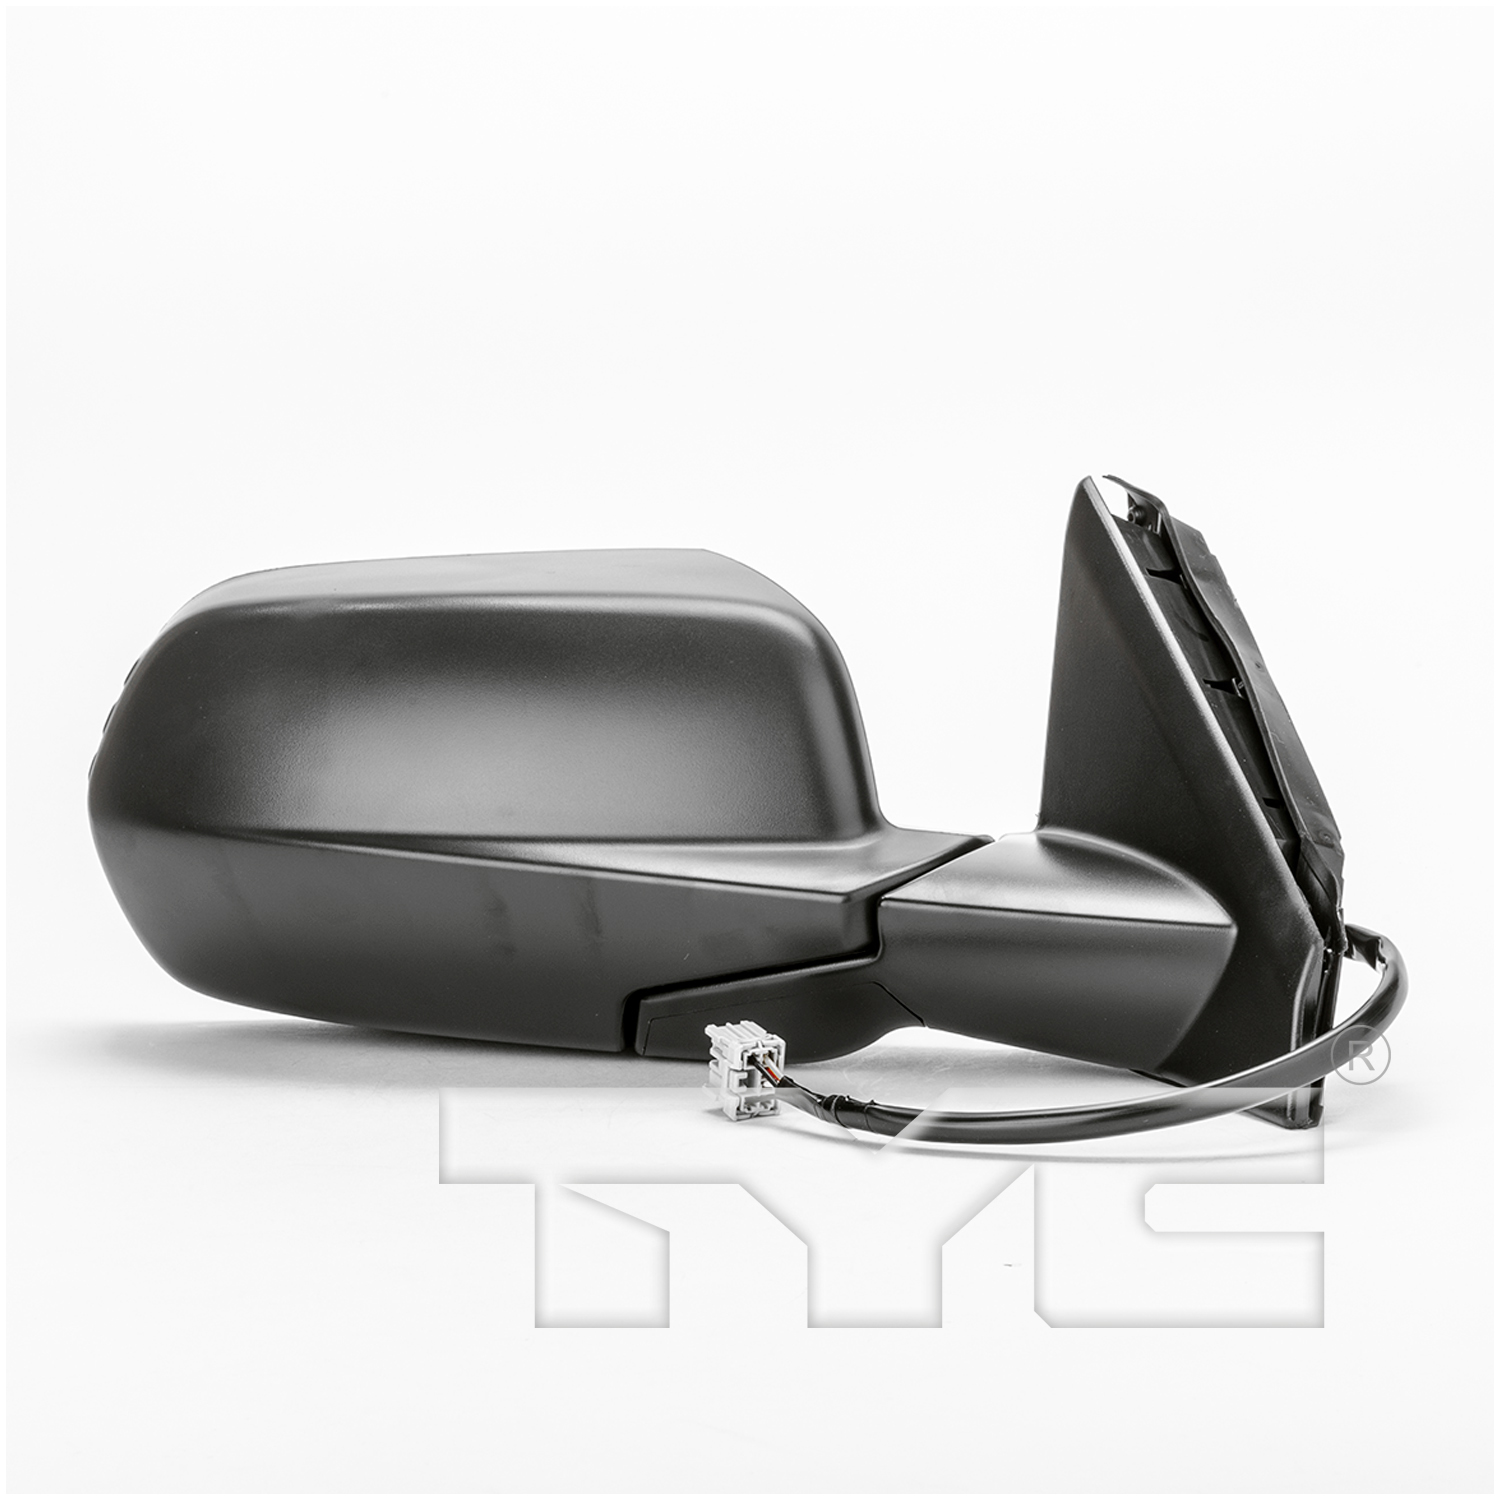 Aftermarket MIRRORS for HONDA - CR-V, CR-V,07-08,RT Mirror outside rear view